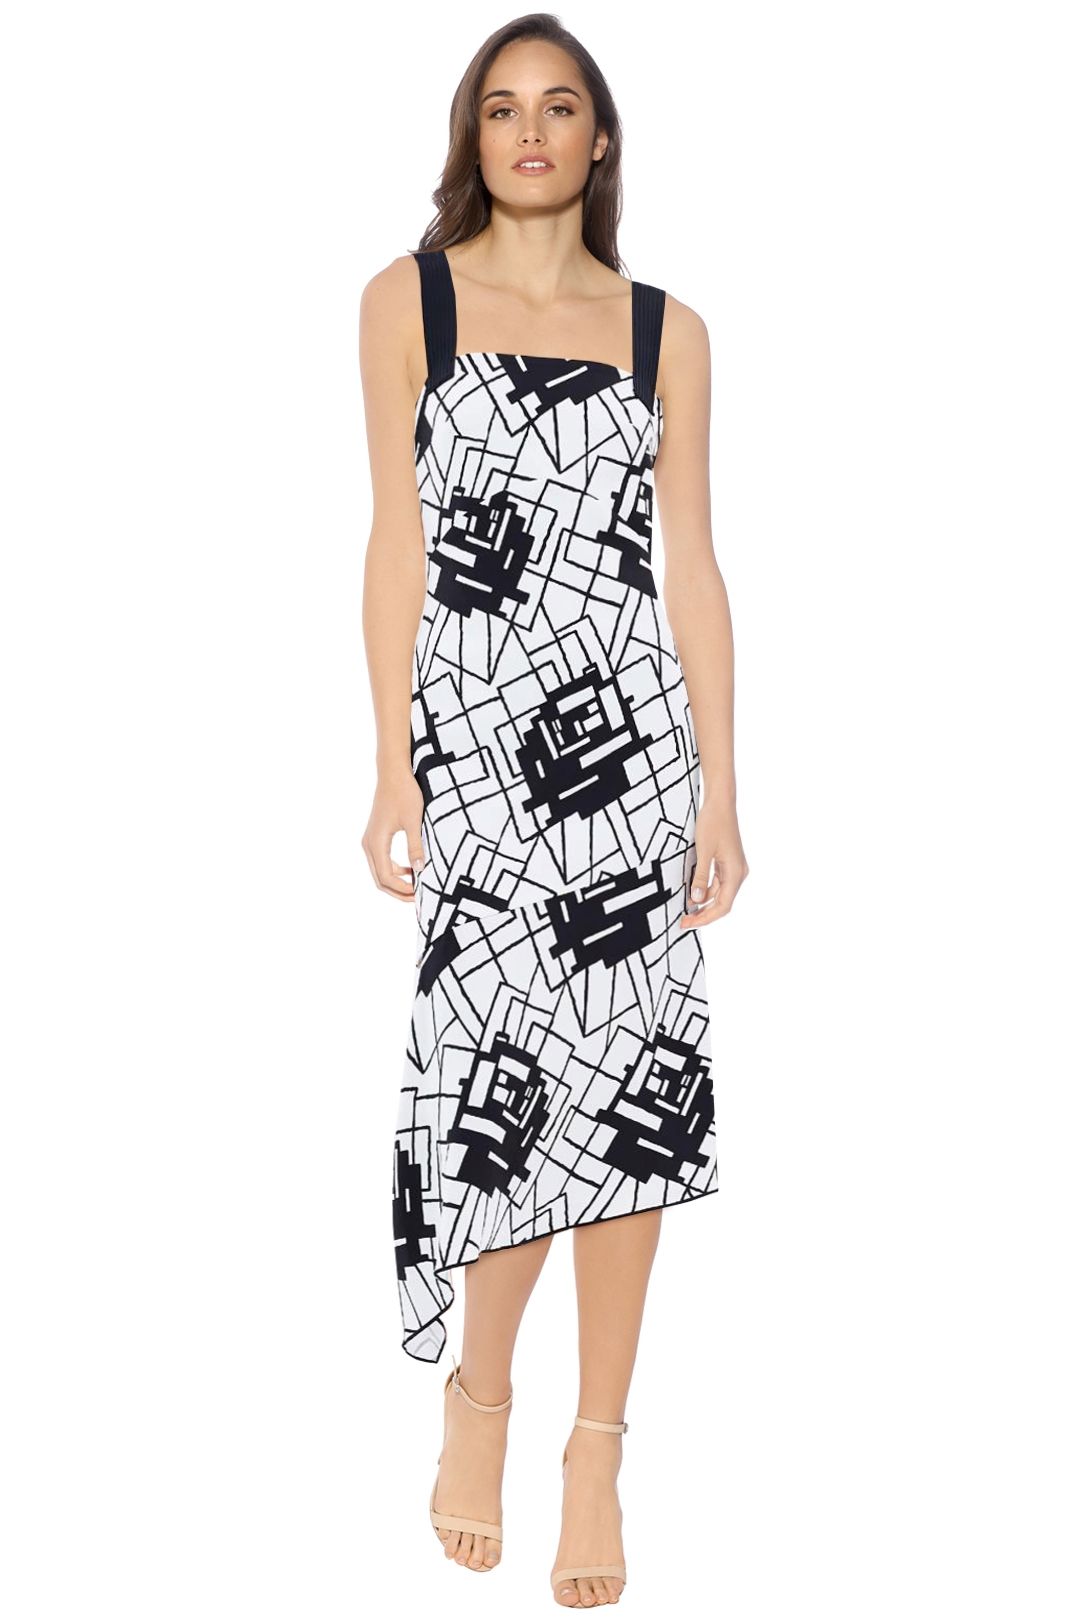 Manning Cartell - Geometry Rules Dress - Black White - Front